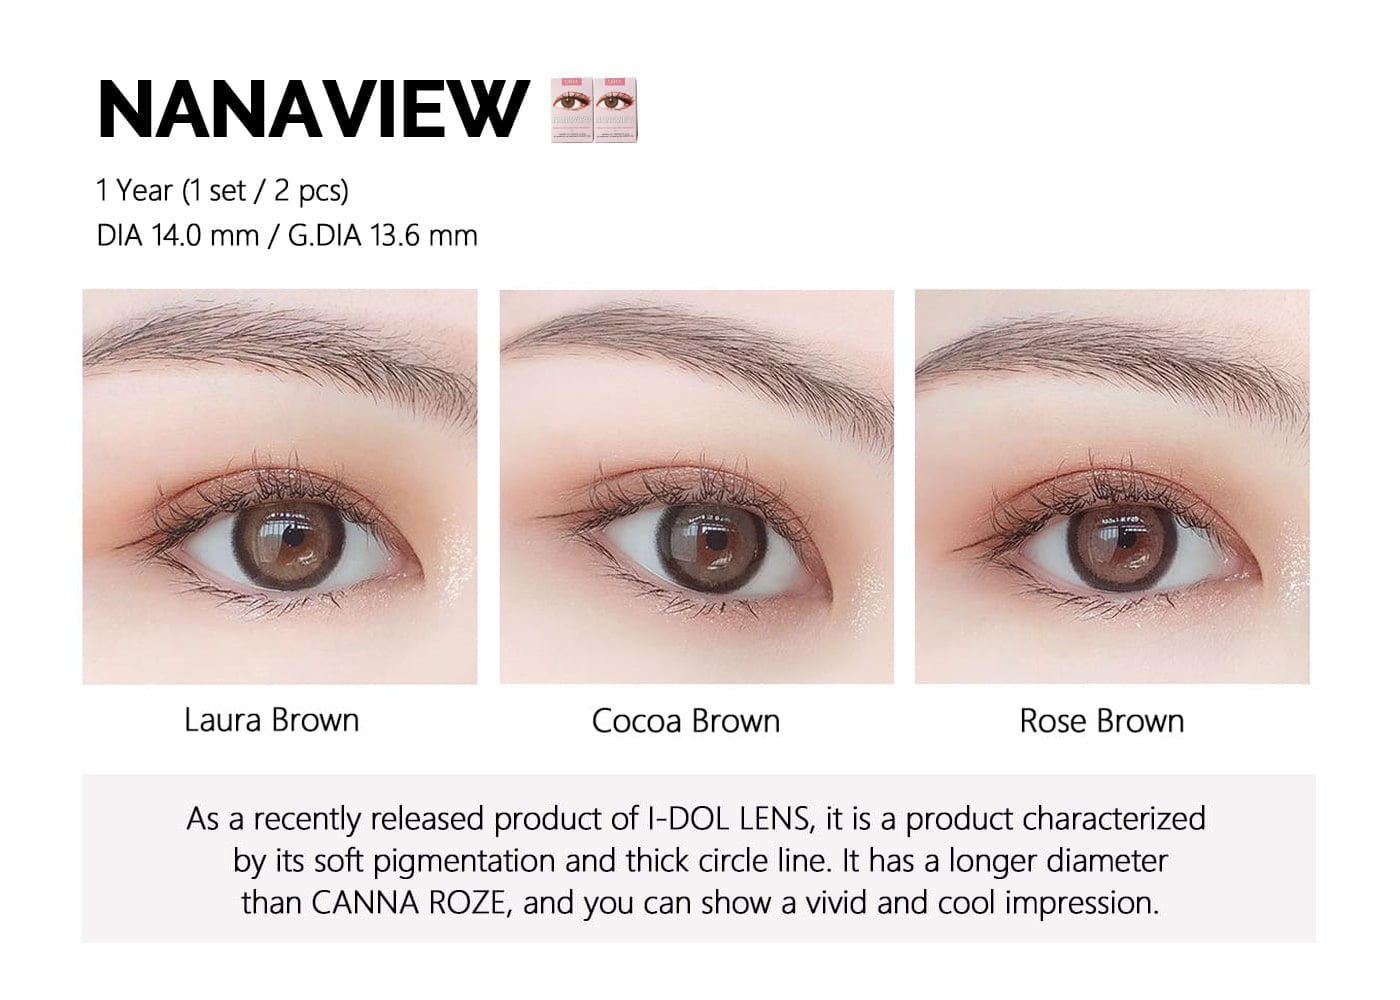 idol,cannaroze,rozeairy,sns colored contacts